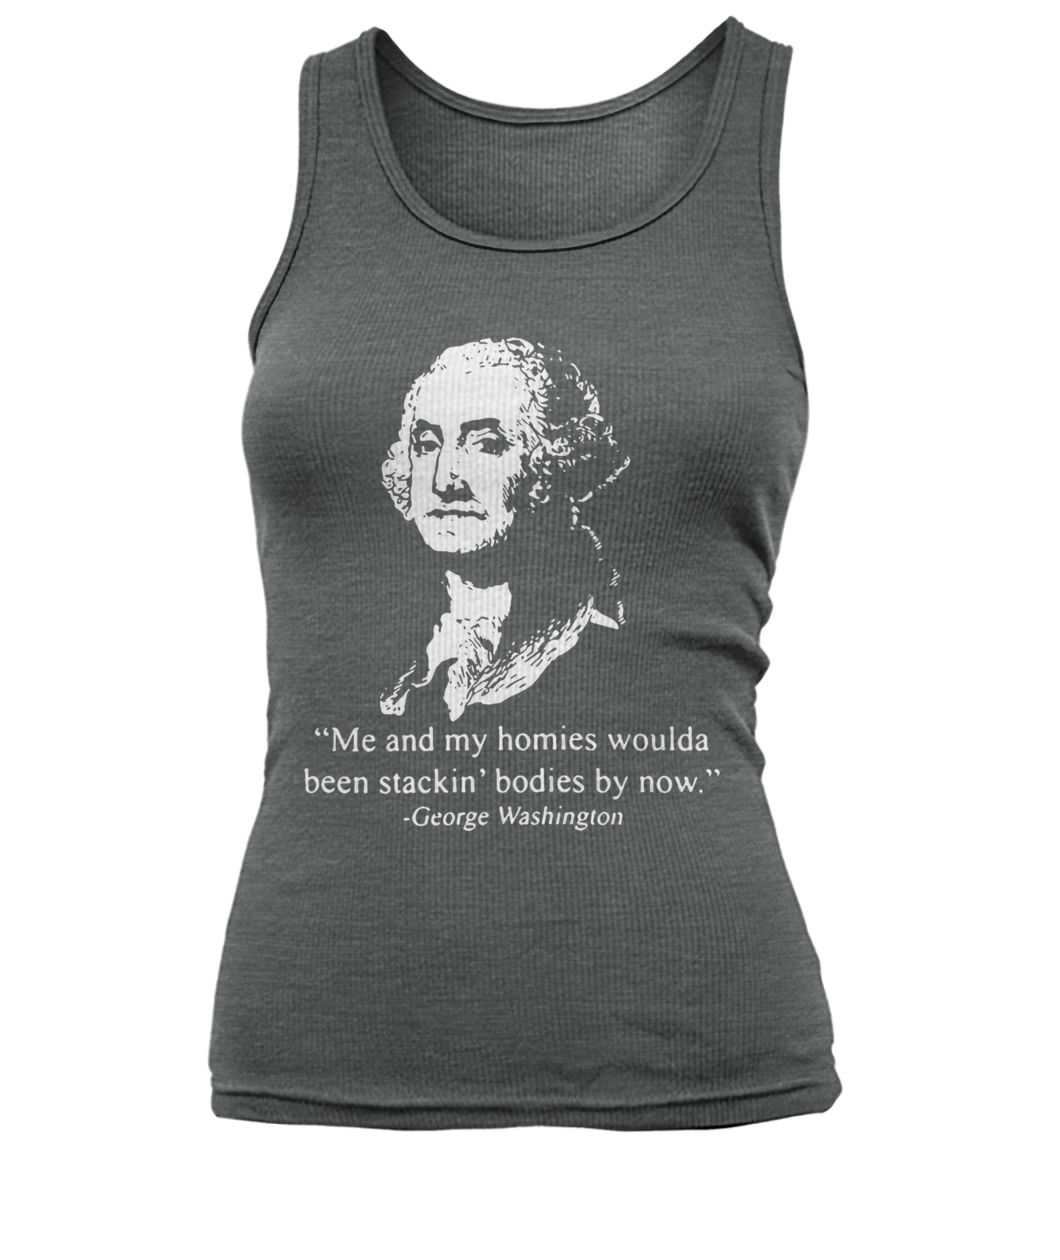 George washington me and my homies woulda been stakin’ bodies by now women's tank top